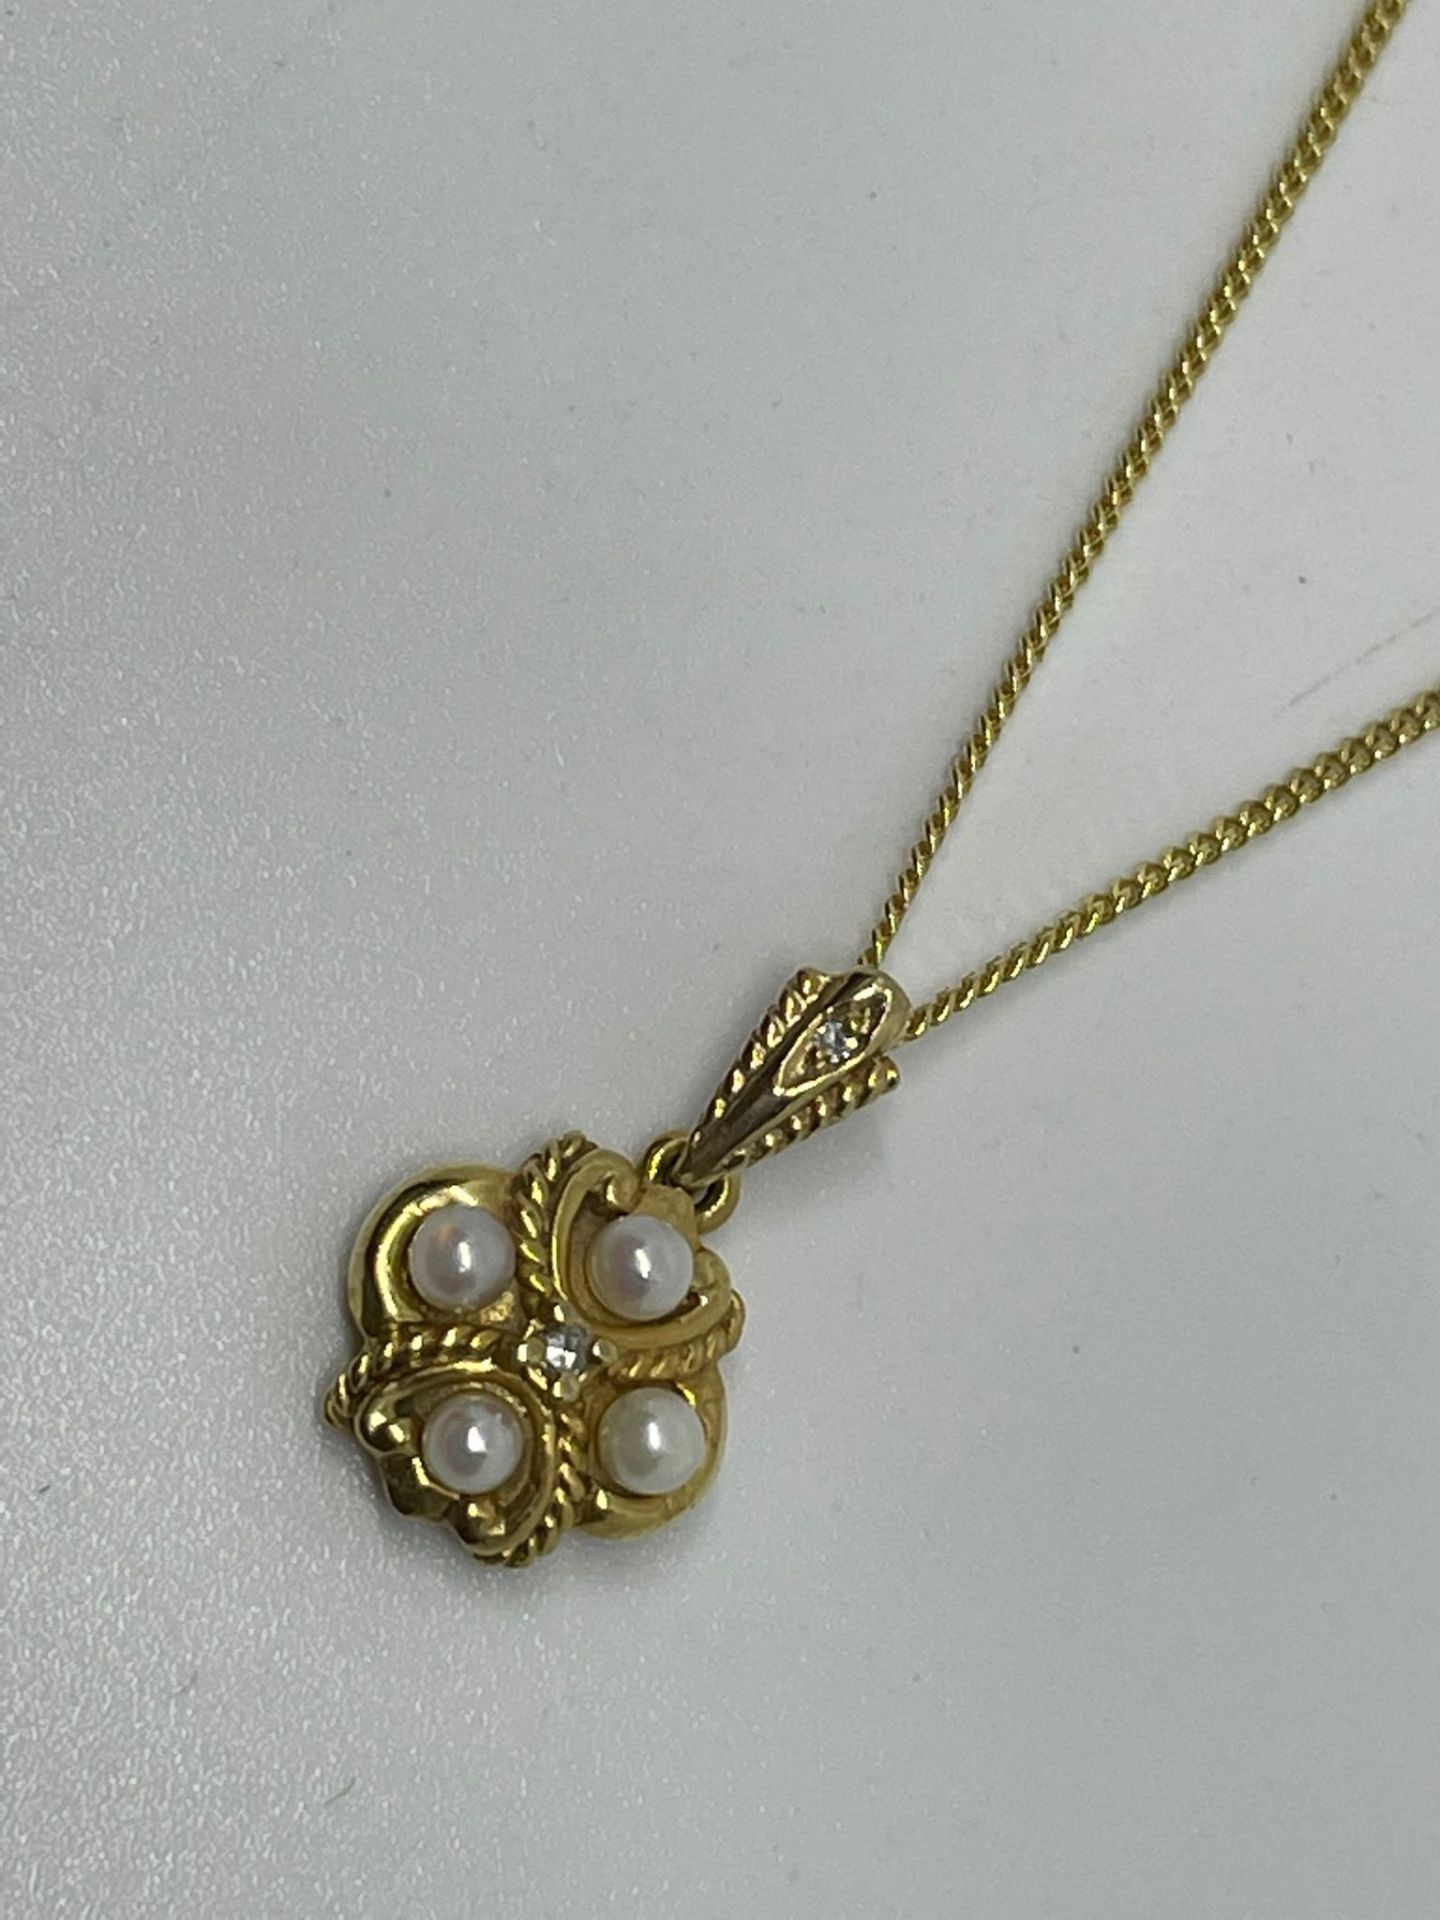 9 ct gold pearl and diamond pendant and chain - Image 2 of 2